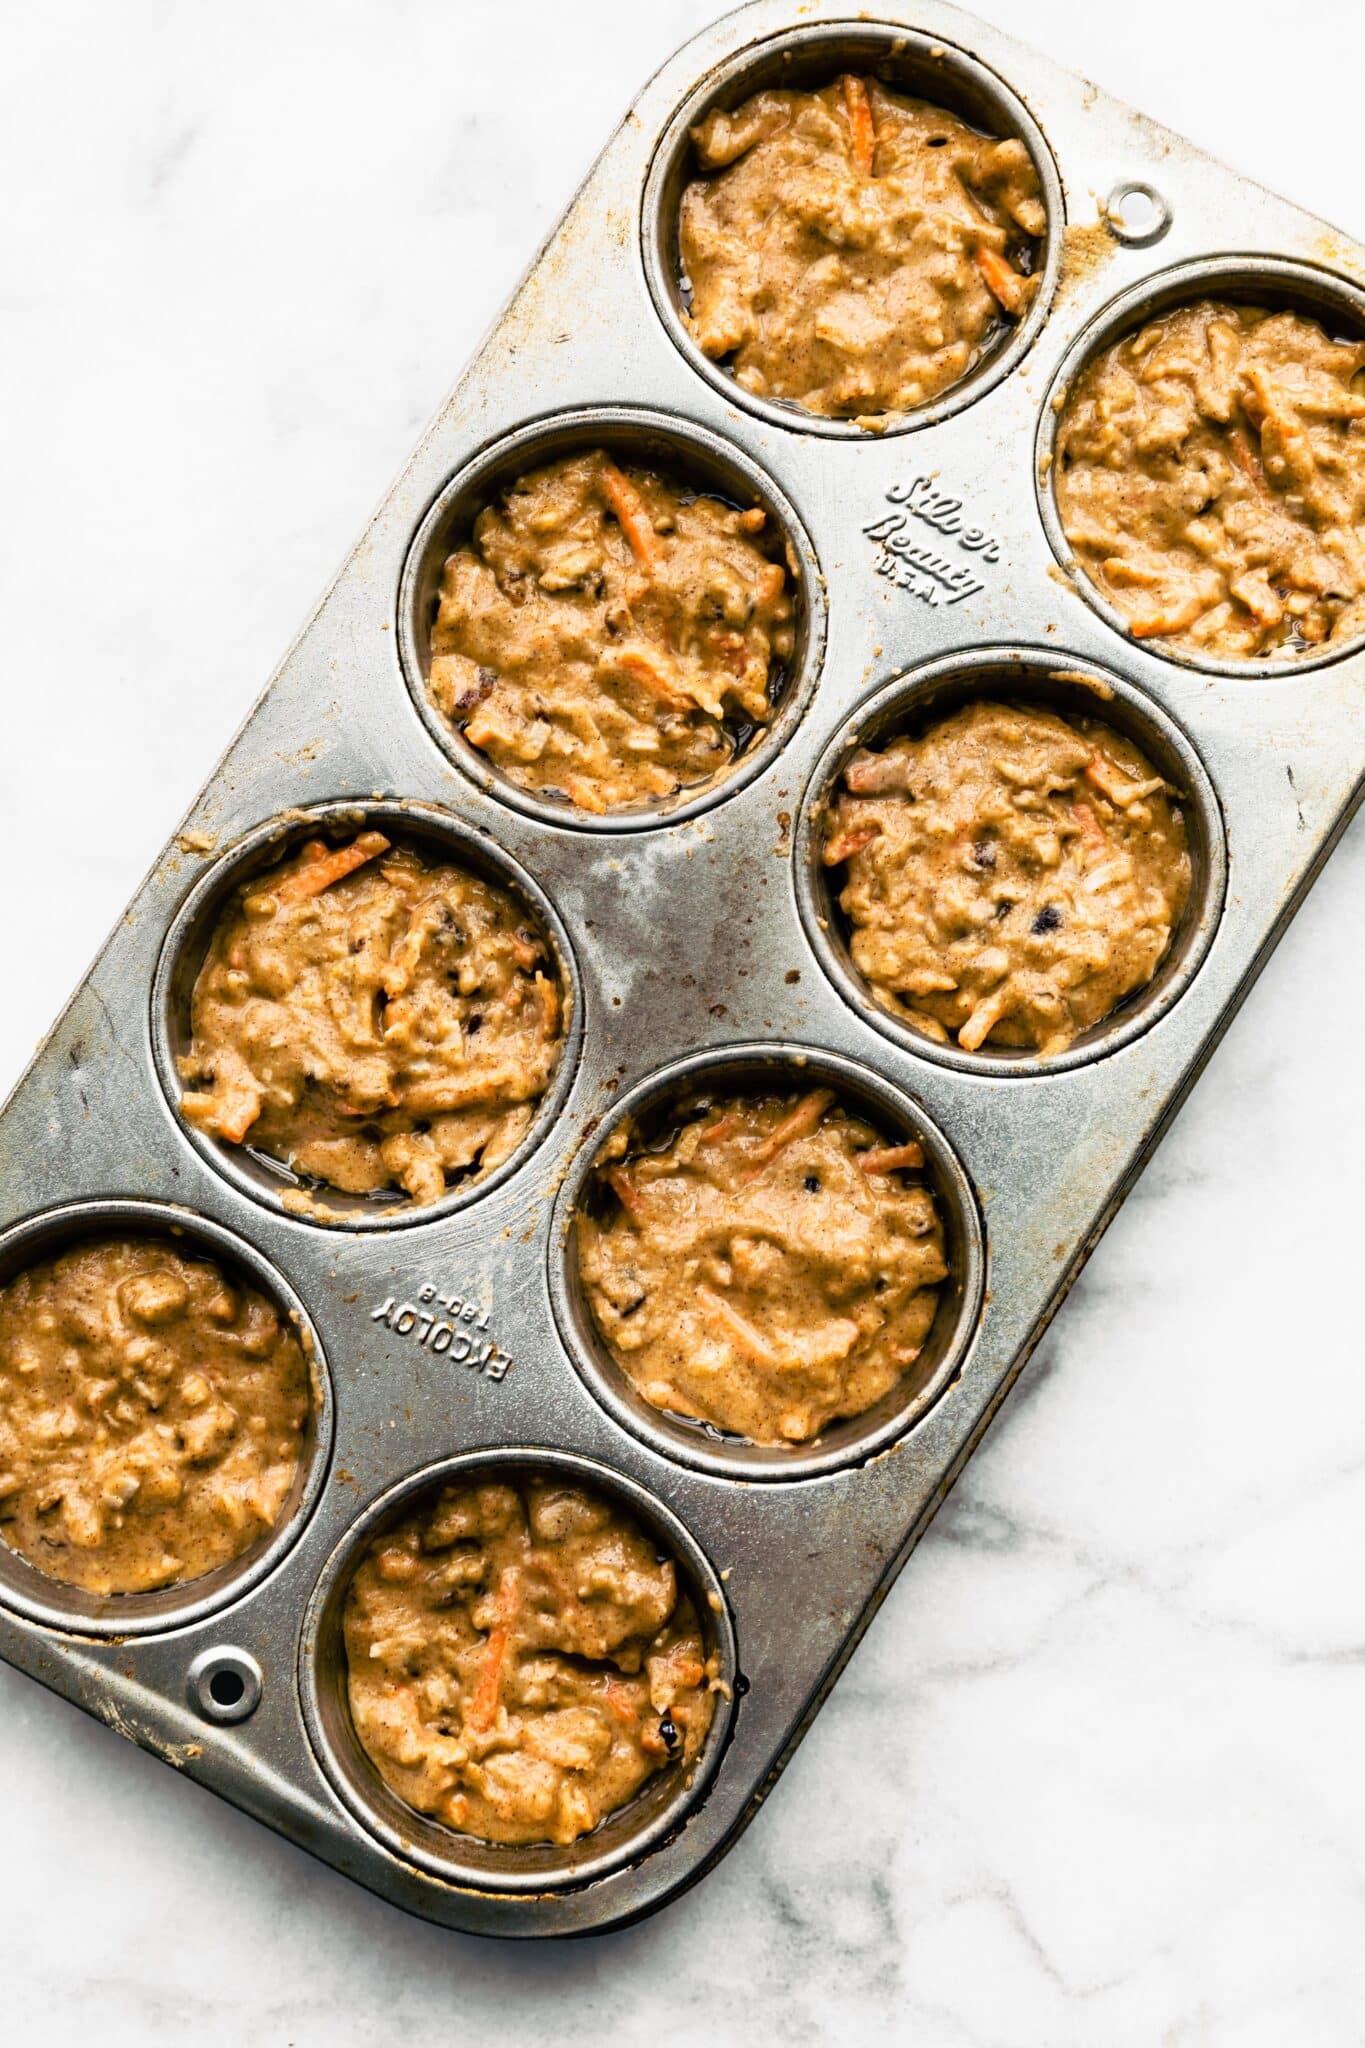 Unbaked healthy carrot cake muffin batter in a muffin pan ready for the oven.